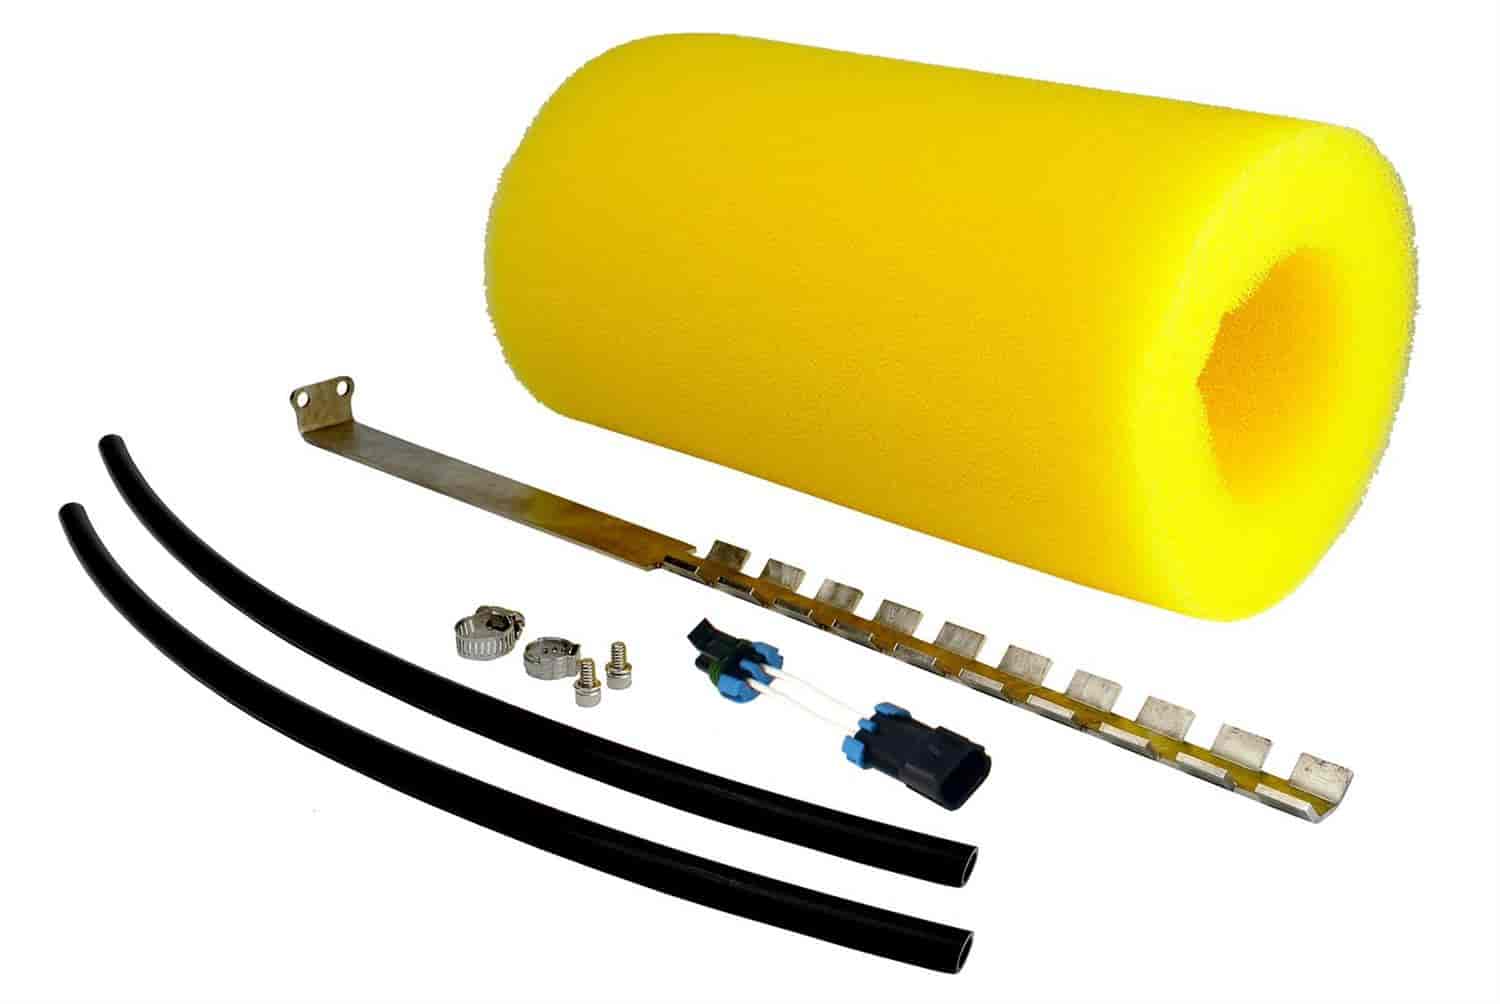 Phantom Fuel Pump Pickup Extension Kit For Use With 027-18310 Includes: